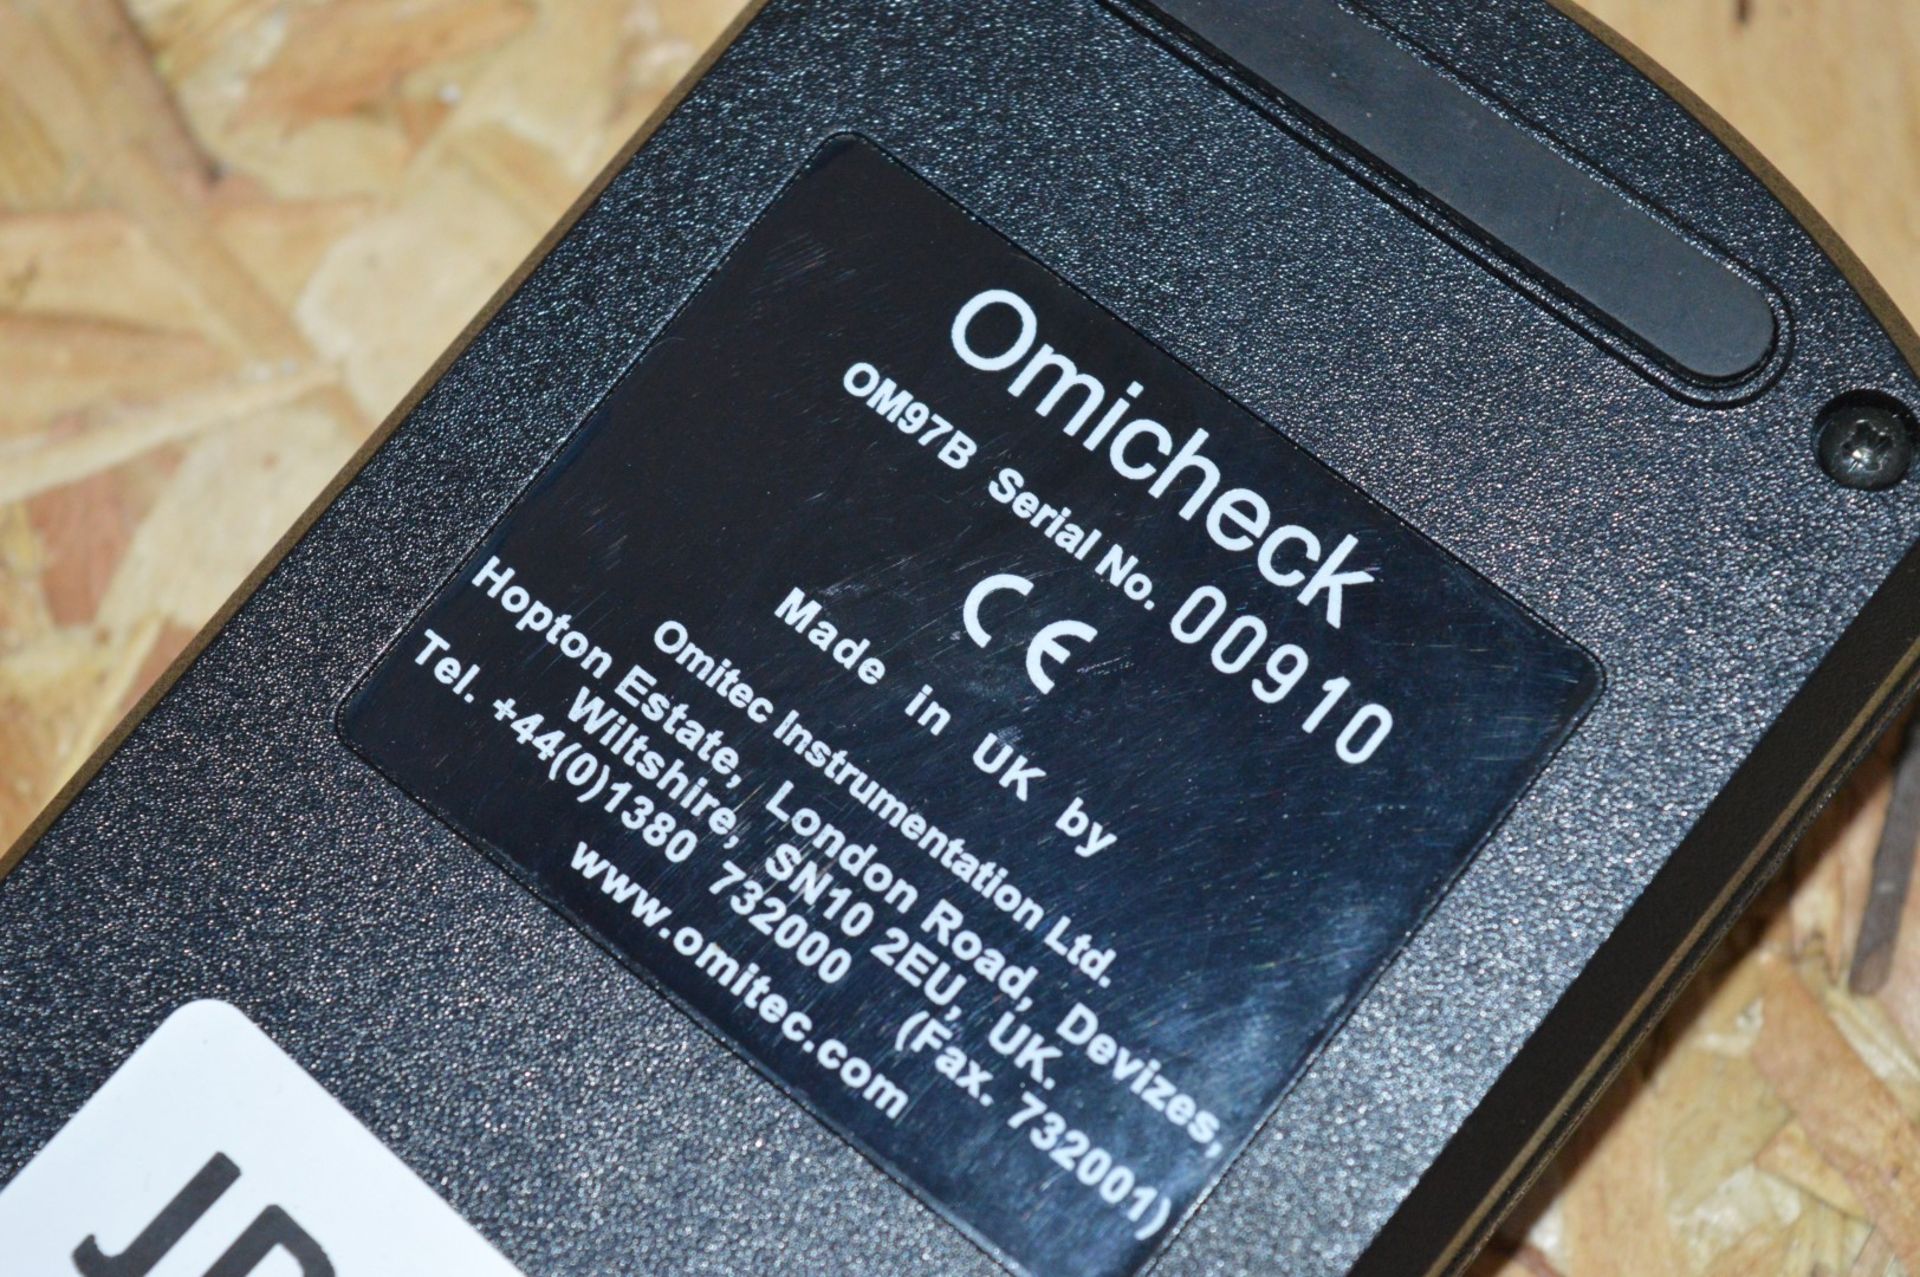 1 x Omitec OmiCheck Automotive Diagnostic Tool - Model OM97B - Good Condition - CL011 - Ref - Image 3 of 5